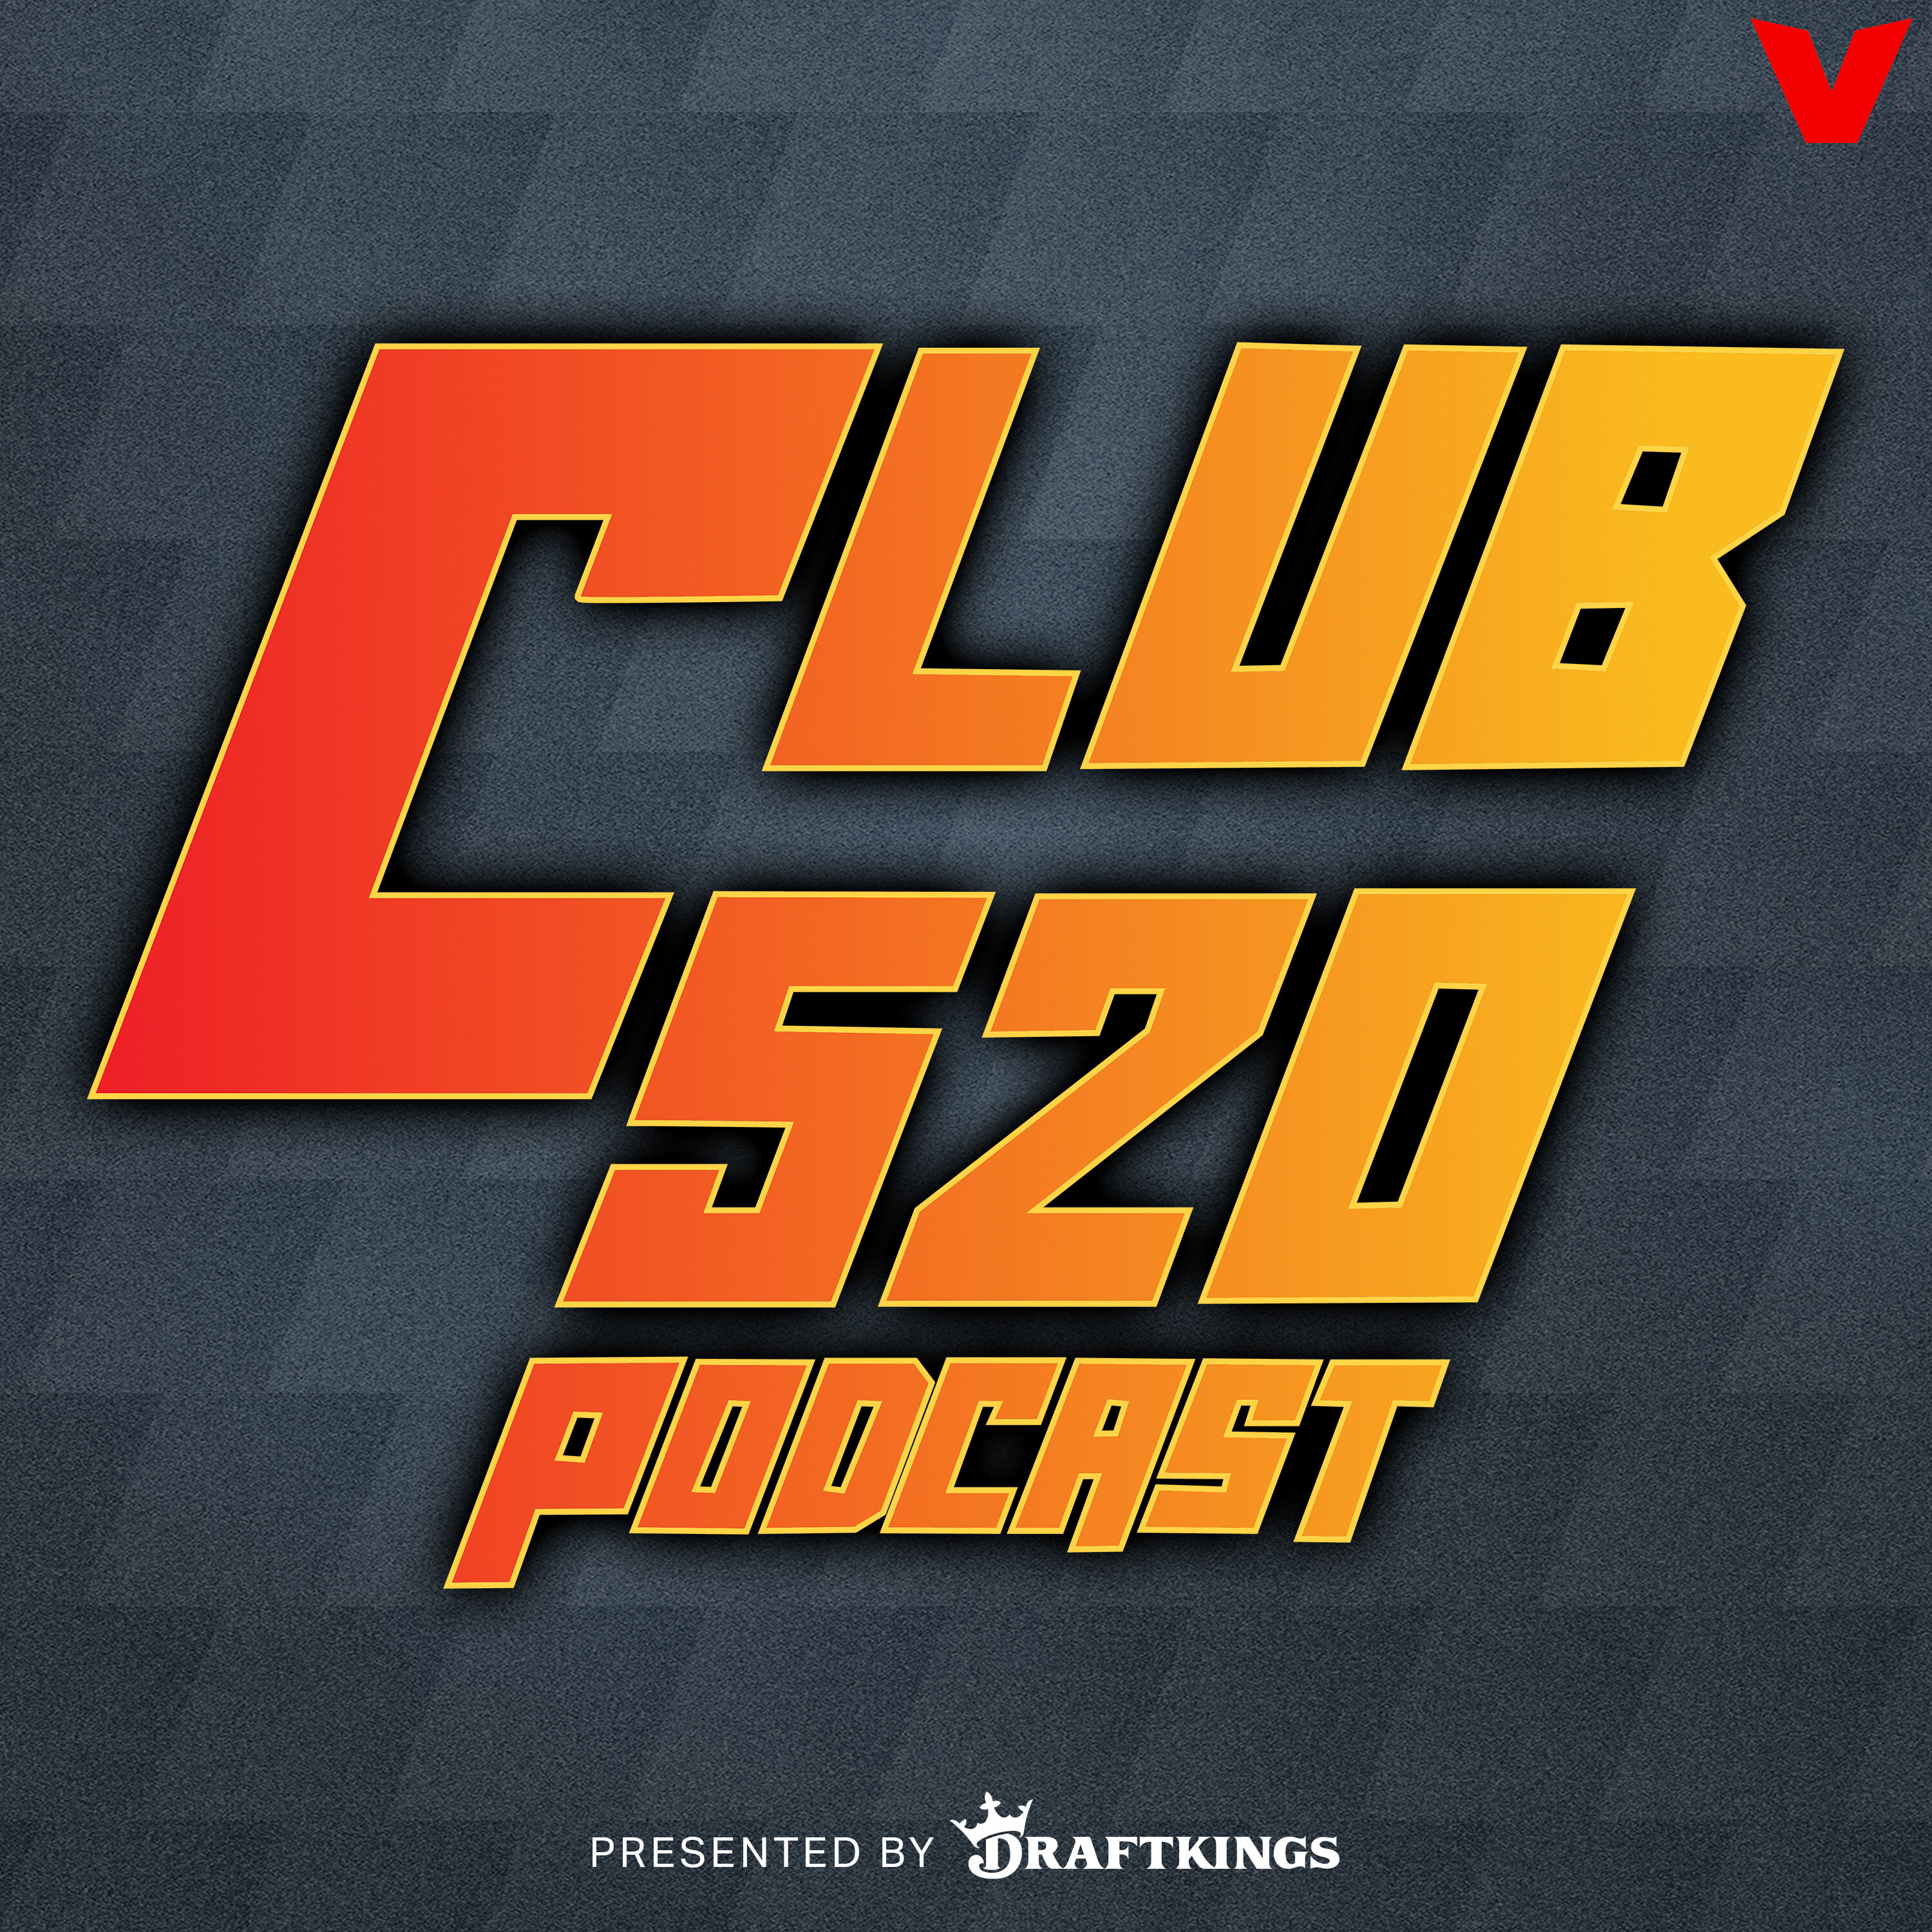 Club 520 - Jeff Teague says Suns are COOKED, reacts to Pacers-Bucks, Brunson vs. Haliburton